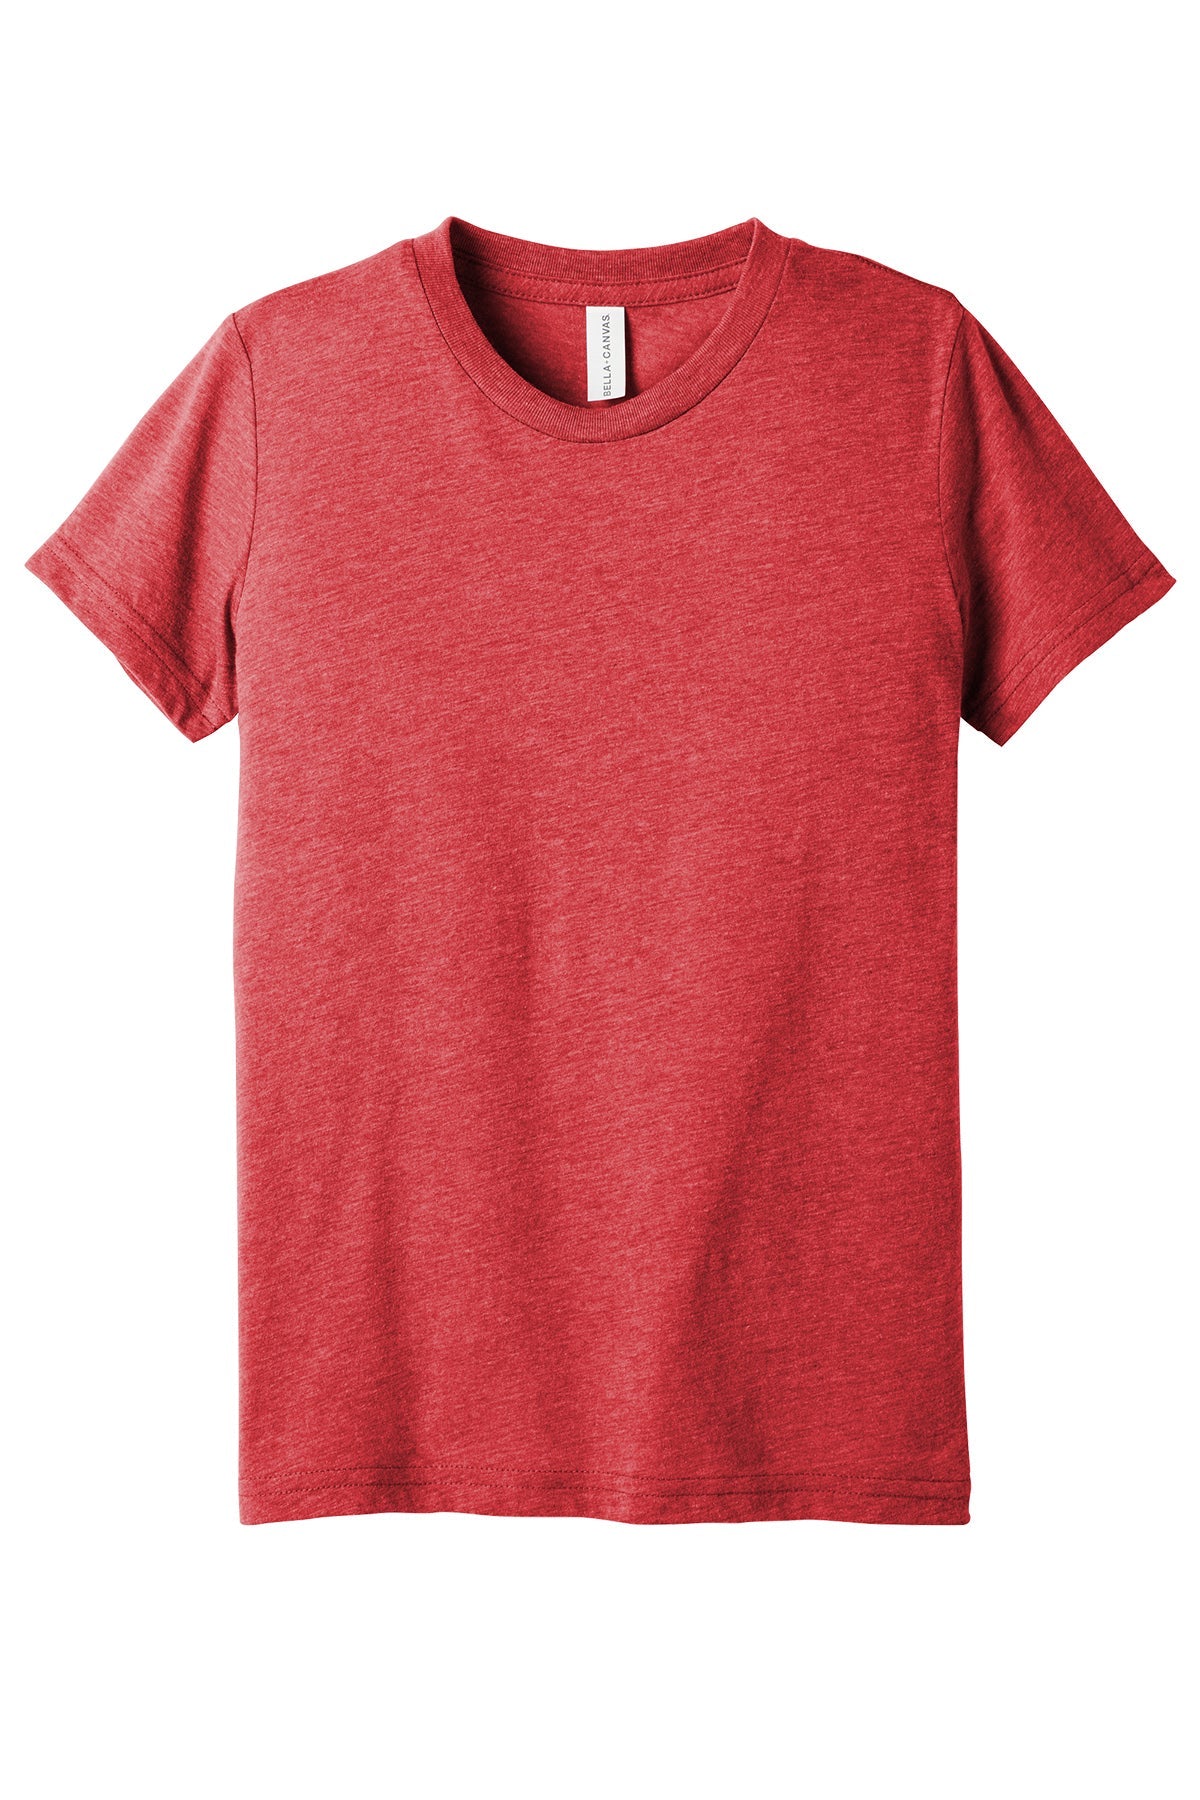 Bella+Canvas Bc3413 Adult T-Shirt Ad Small / Red Triblend